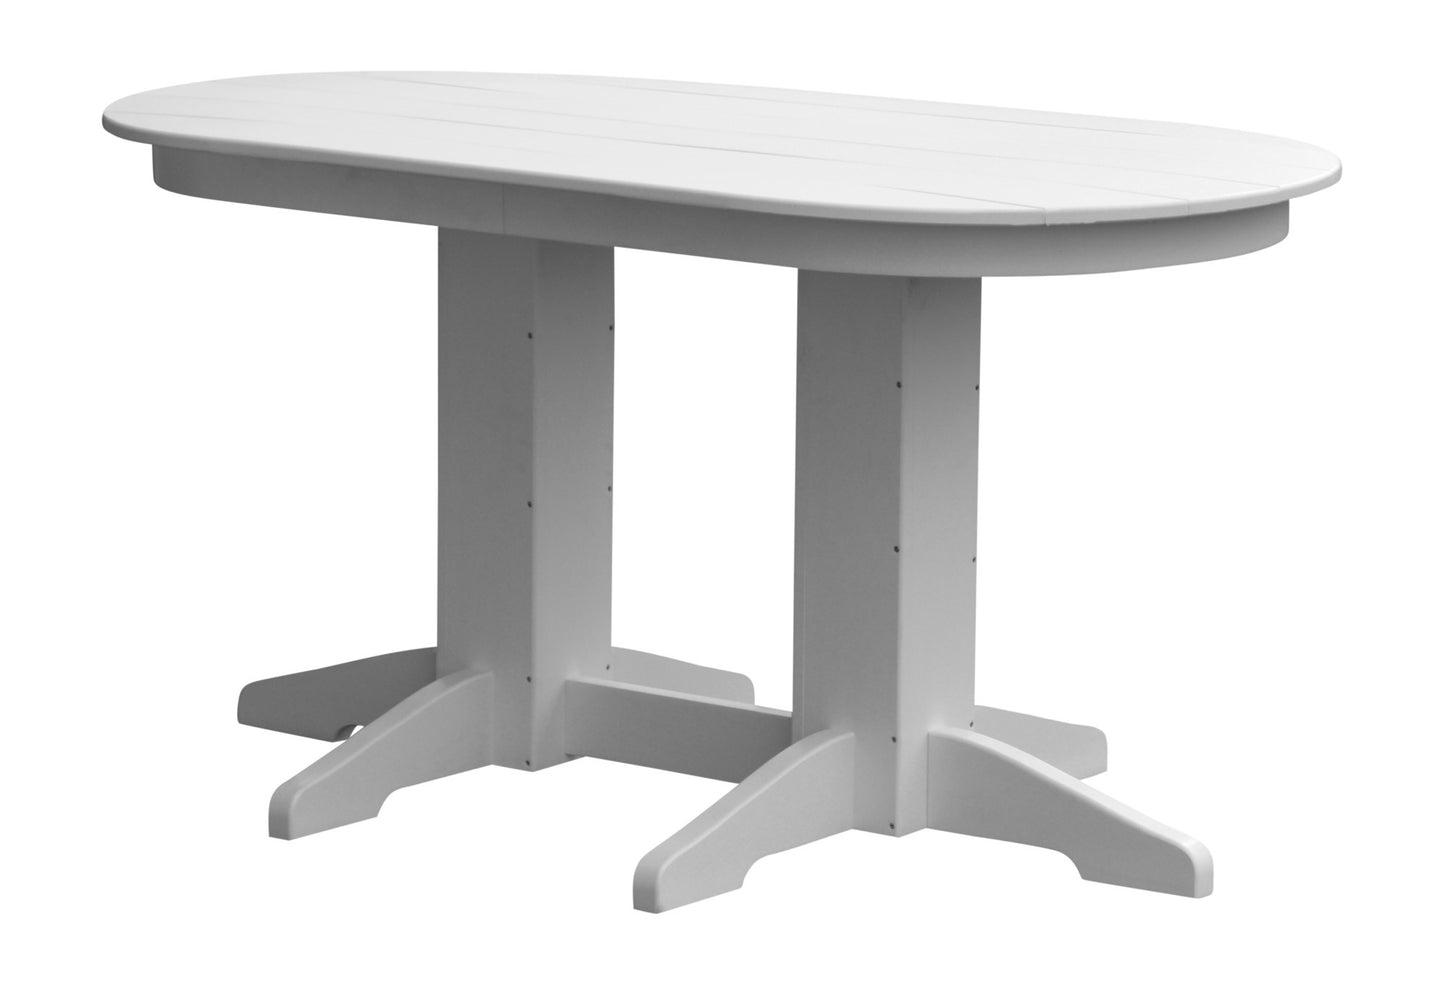 A&L Furniture Company Recycled Plastic 5' Oval Dining Table - White